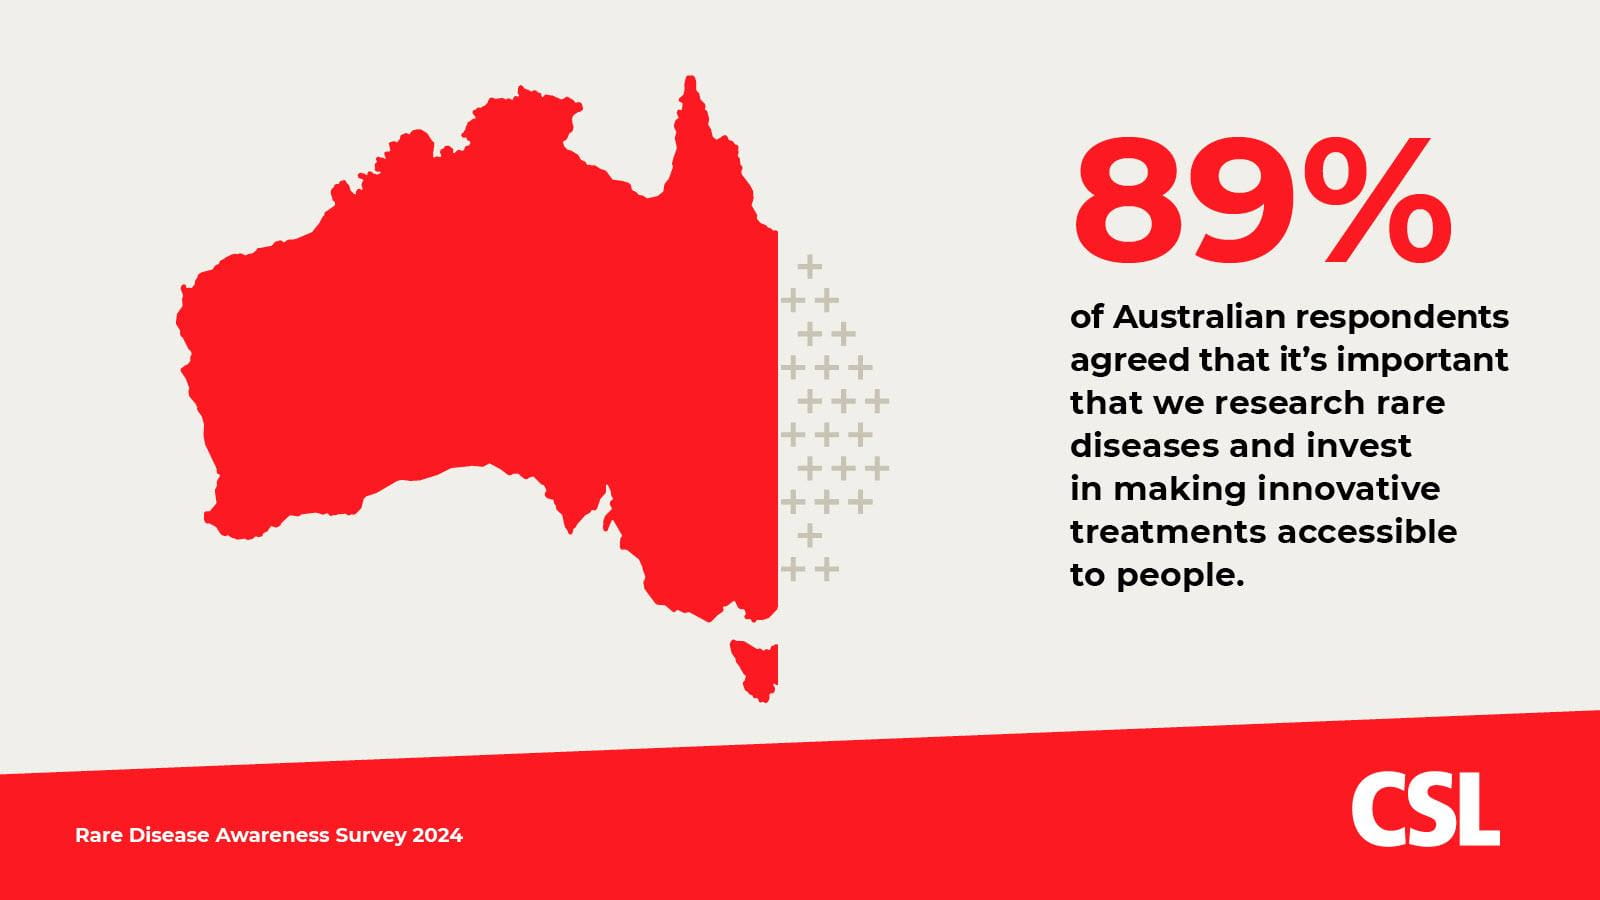 89% of Australian respondents agreed that it's important to research rare diseases and invest in making innovative treatments accessible to patients.